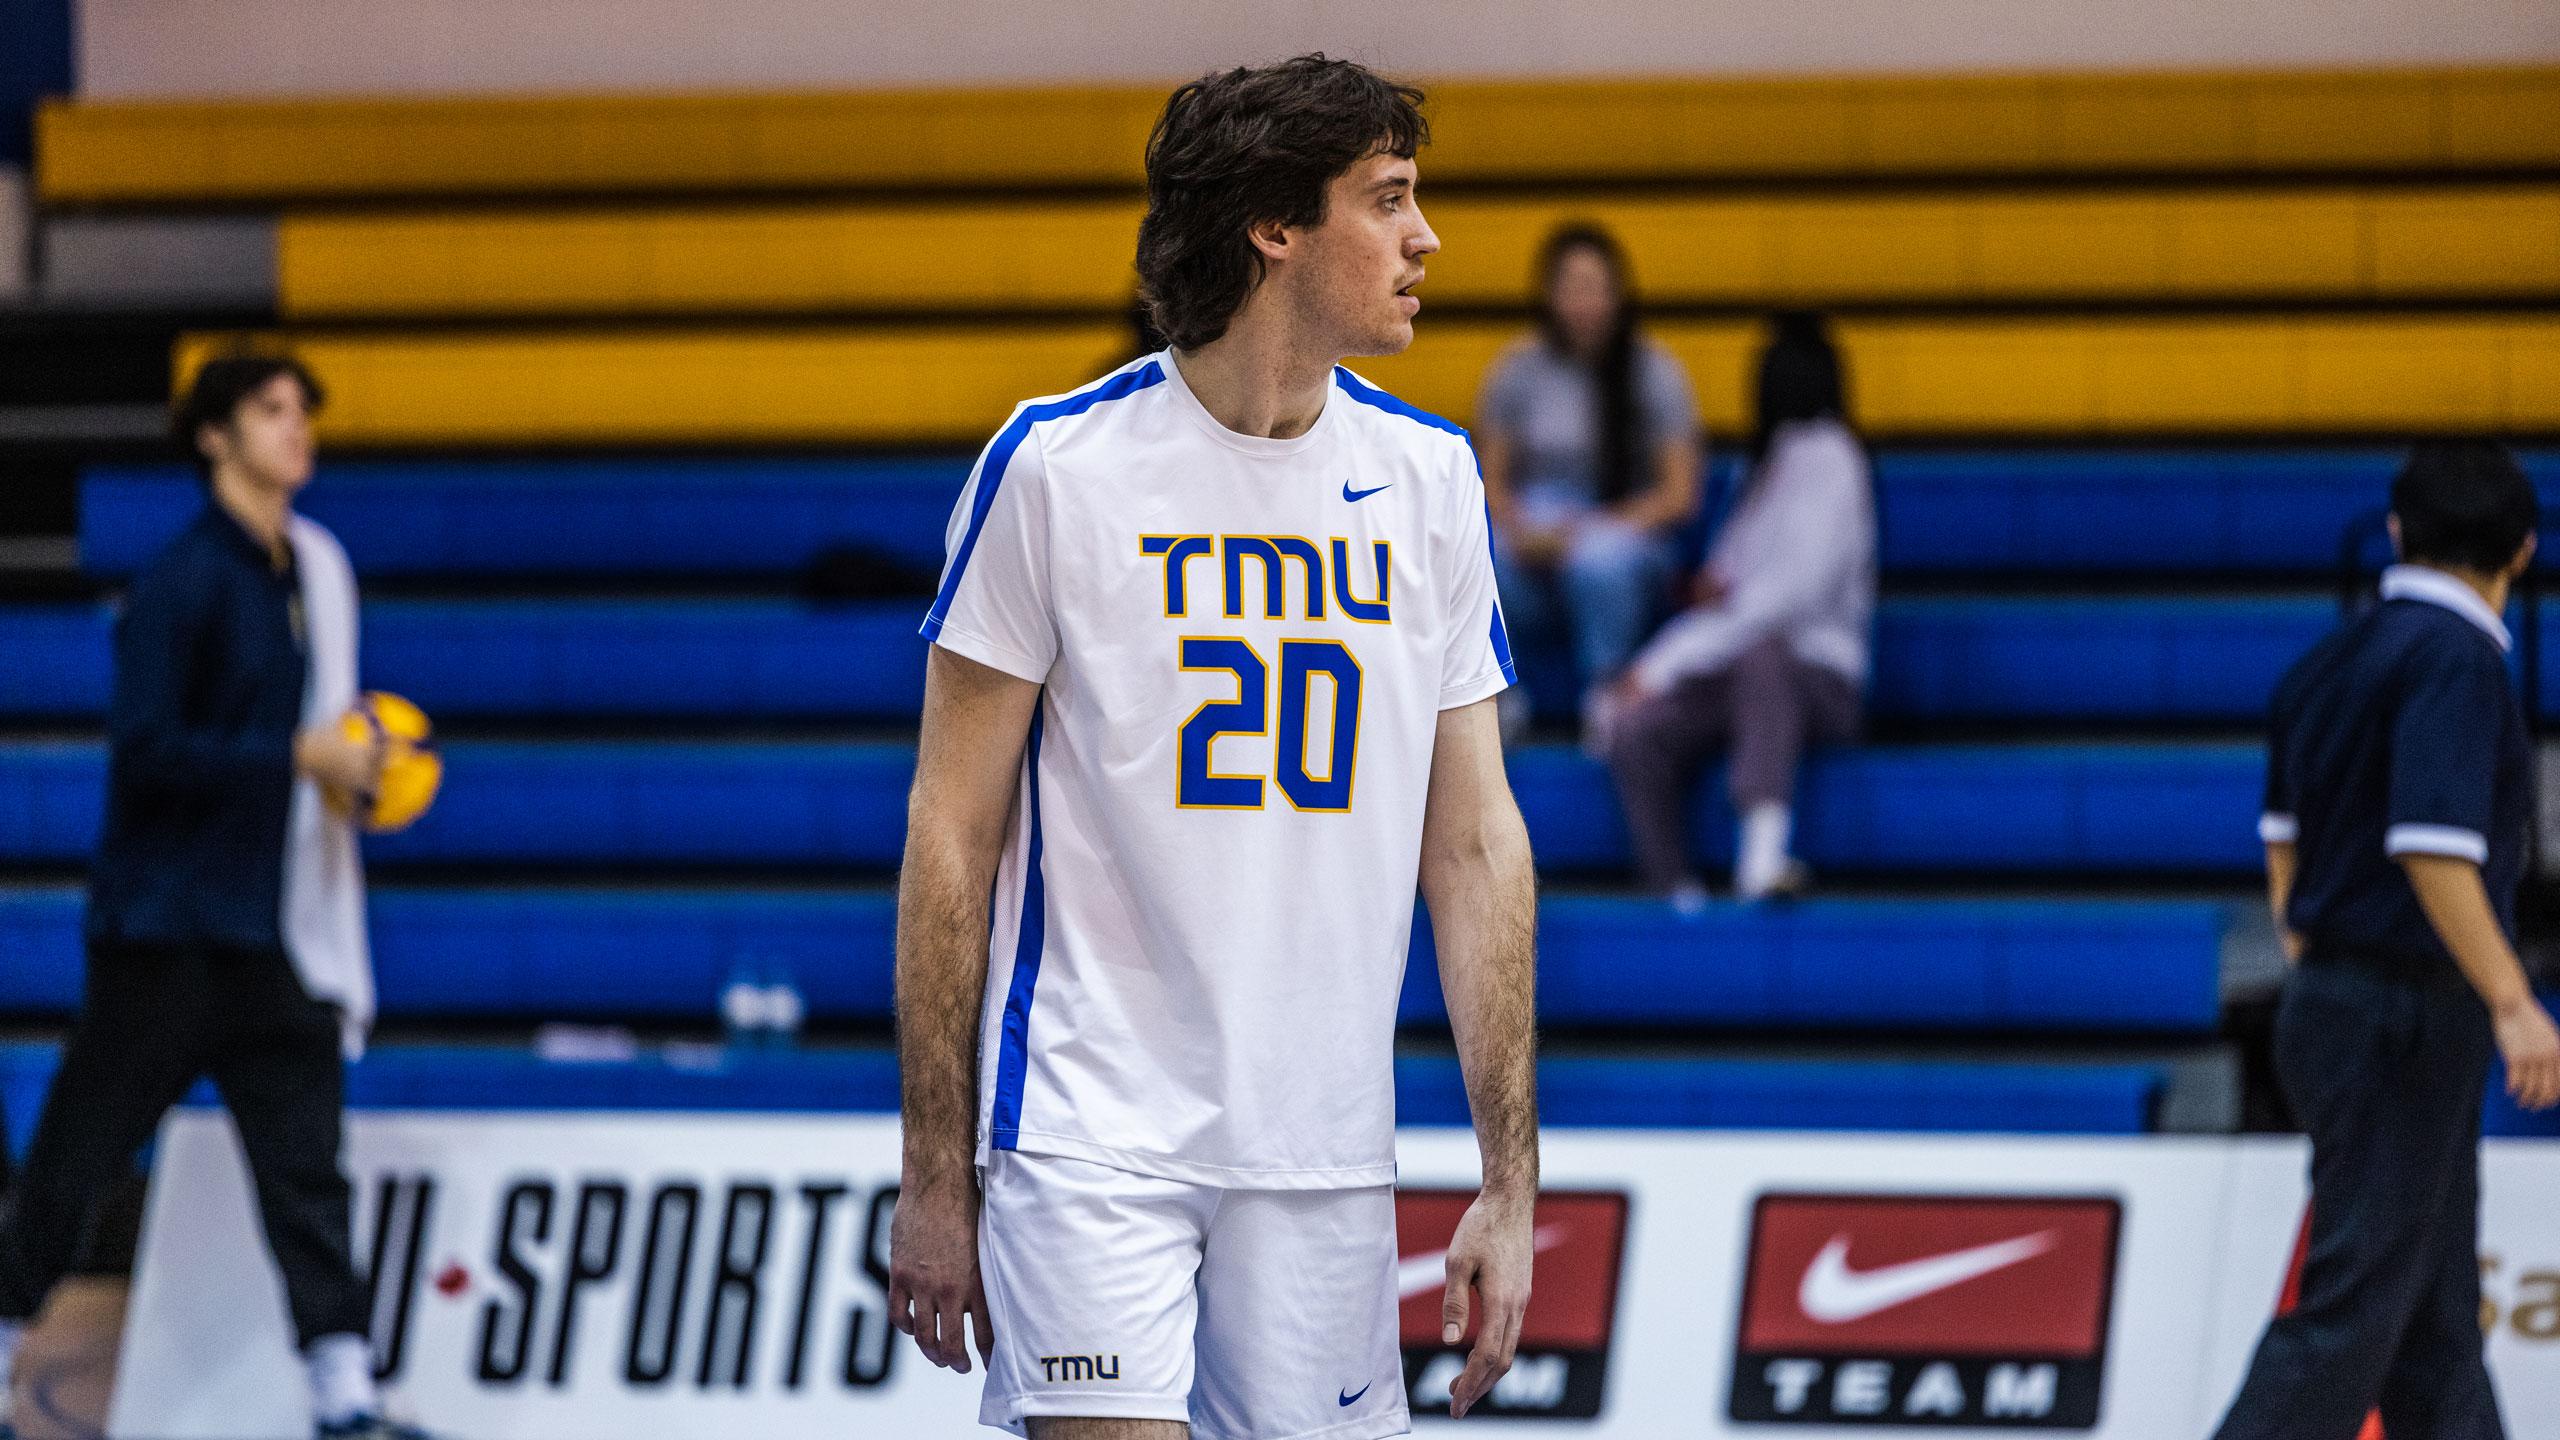 A TMU men's volleyball player in a white jersey looks towards the net